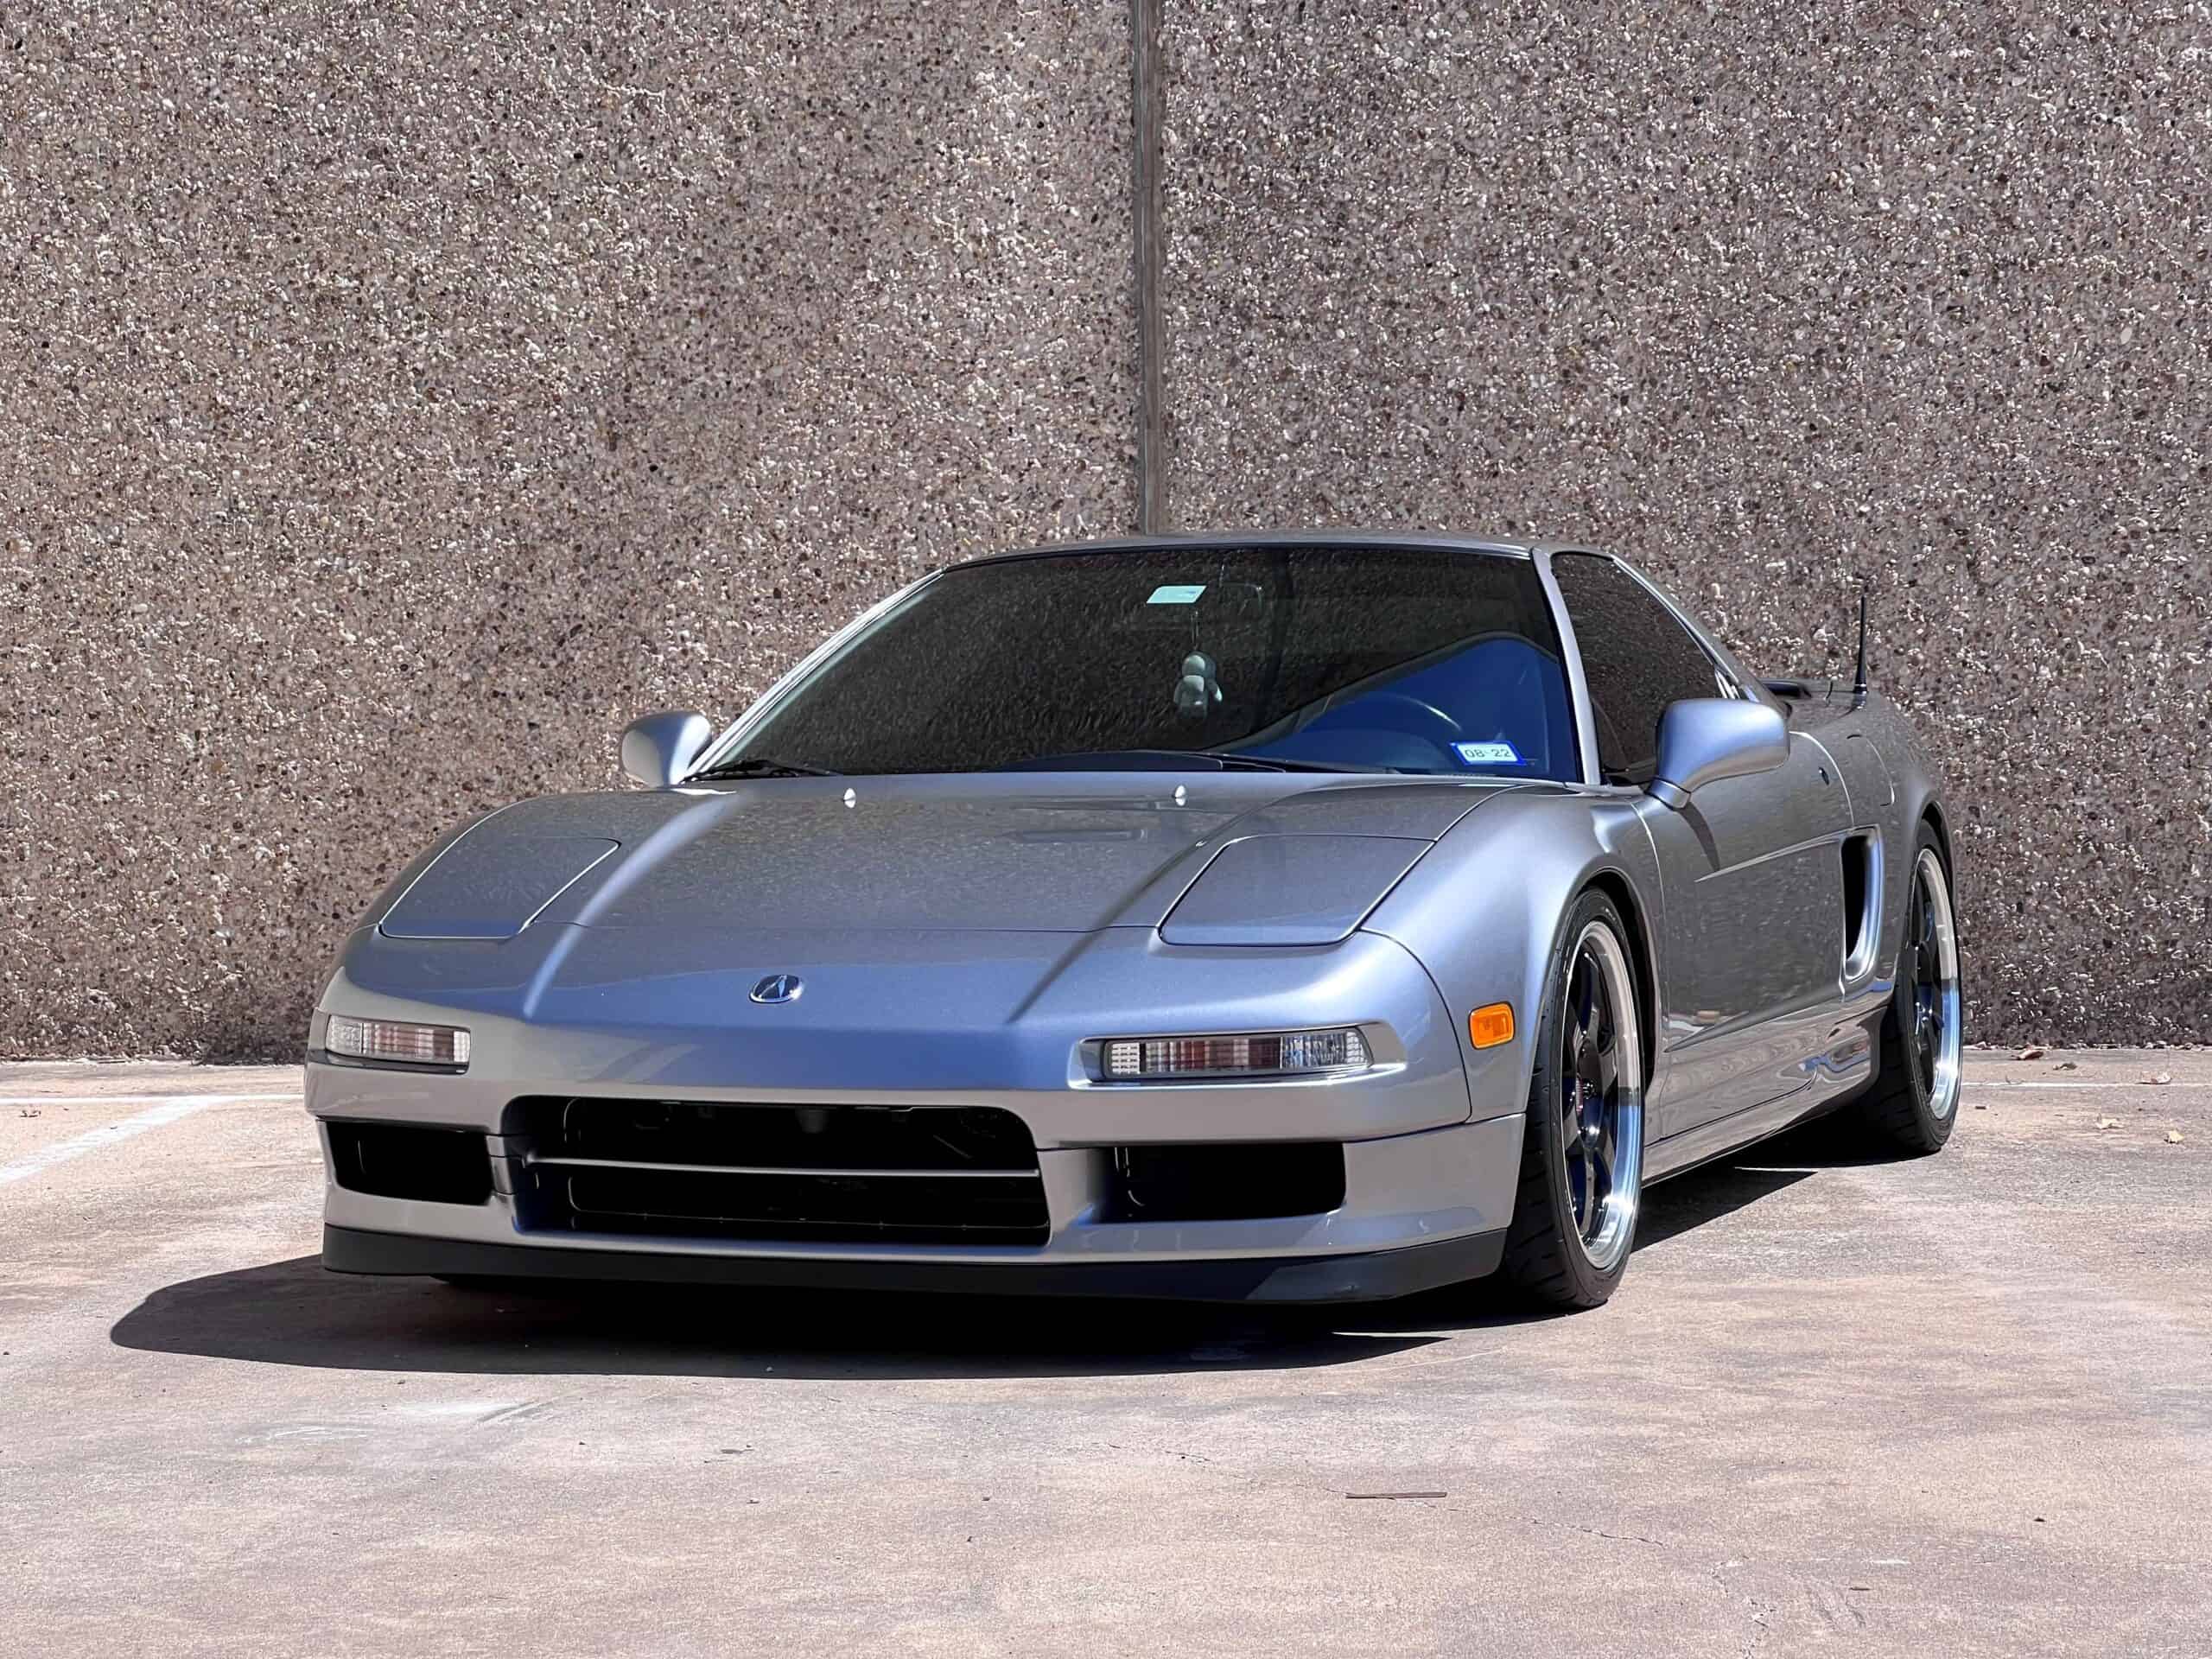 XPEL Austin | Blog | Mint Condition Acura NSX Preserved with PPF